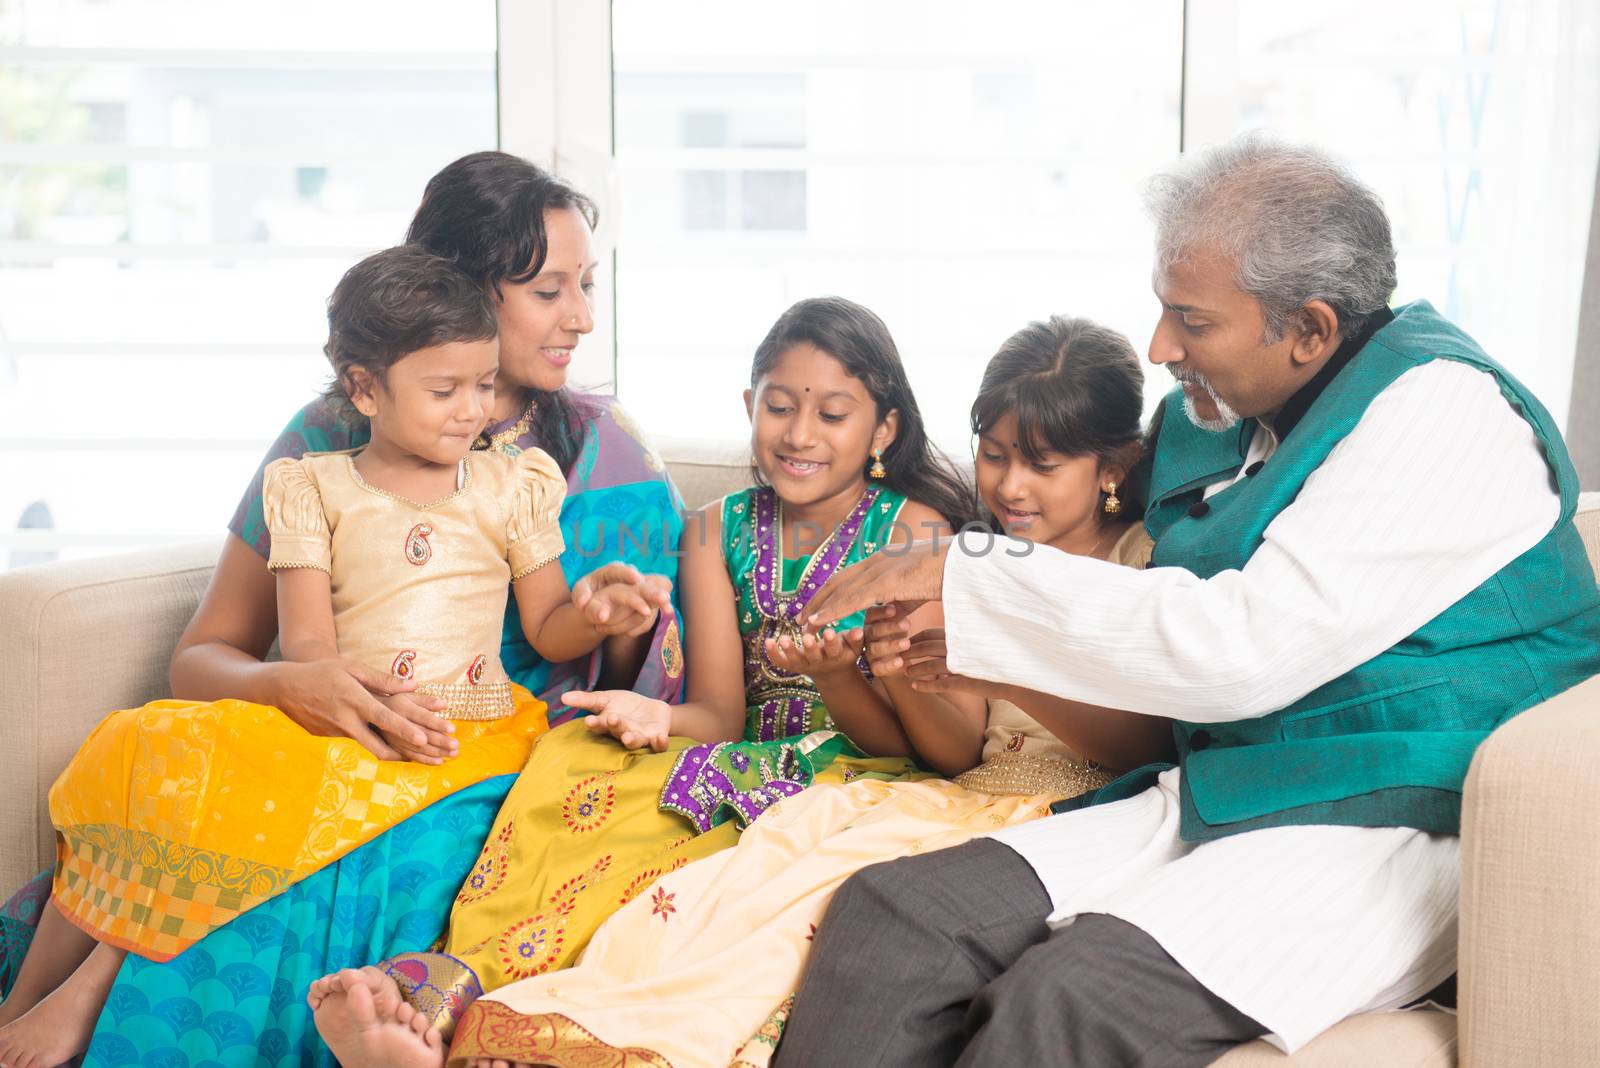 Portrait of happy Indian family having fun at home. Asian people indoors lifestyle.